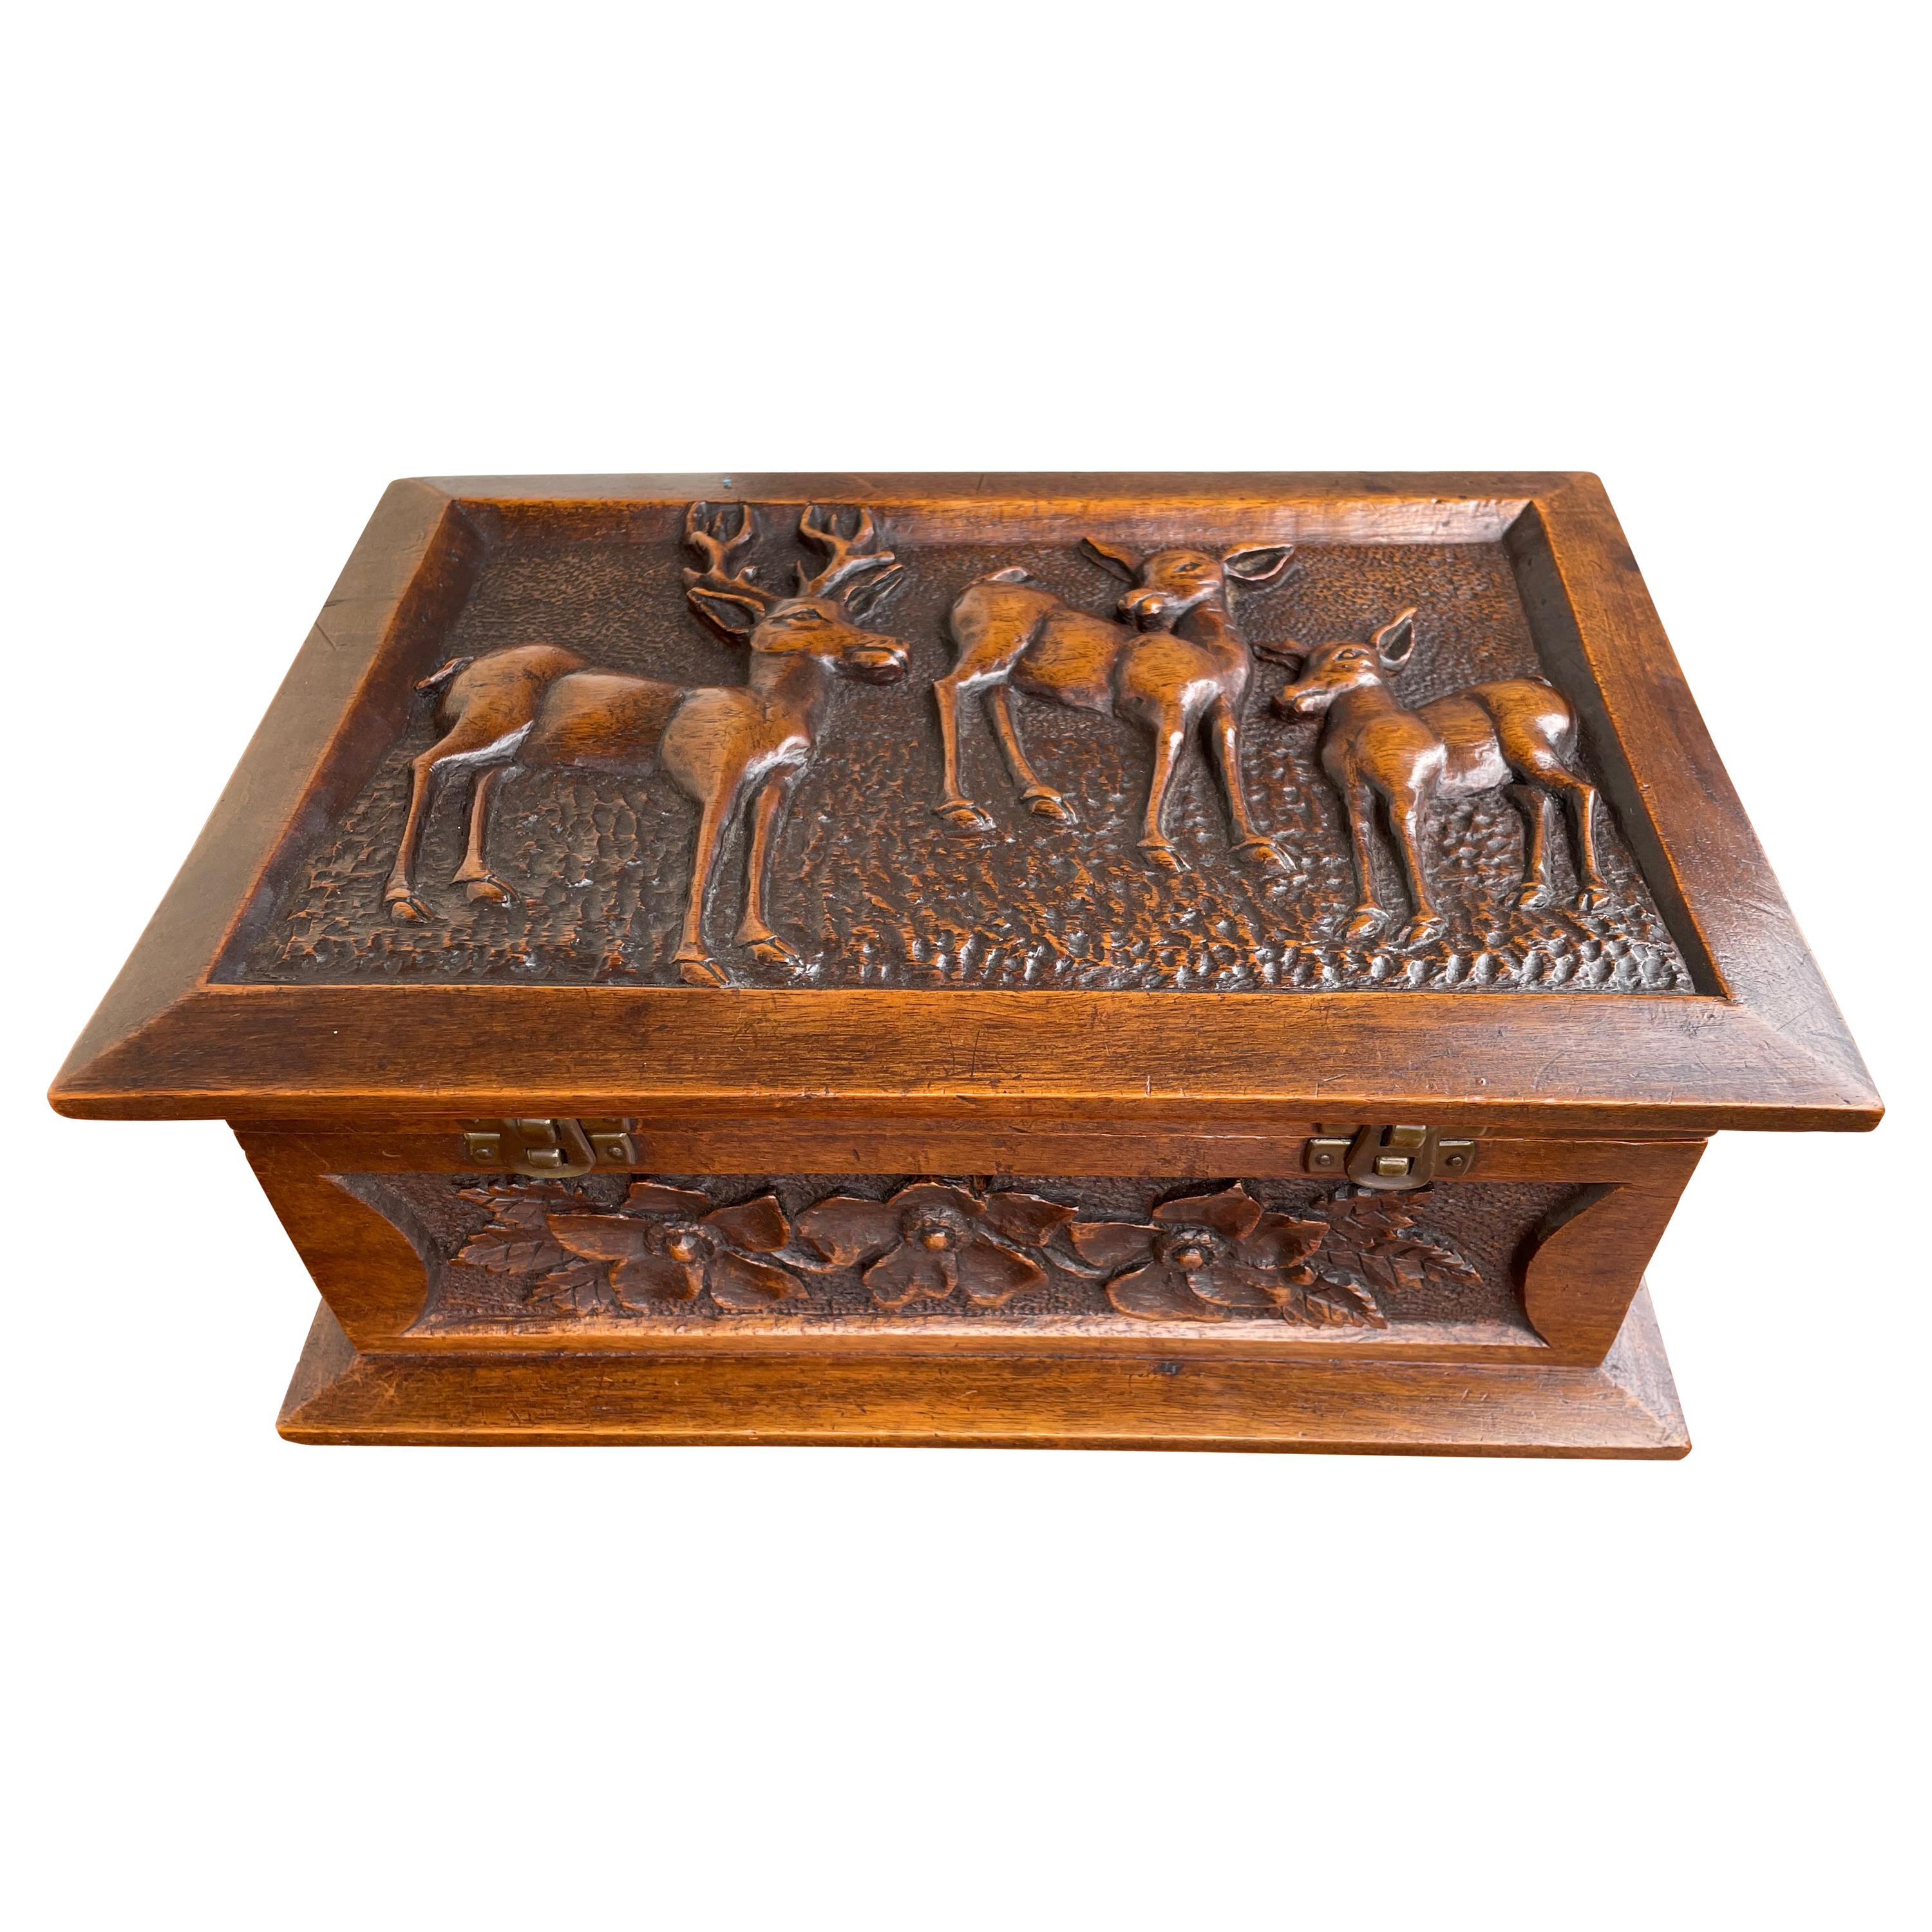 Stunning Arts & Crafts Box with Hand Carved Deer Sculptures in Deep Relief, 1910